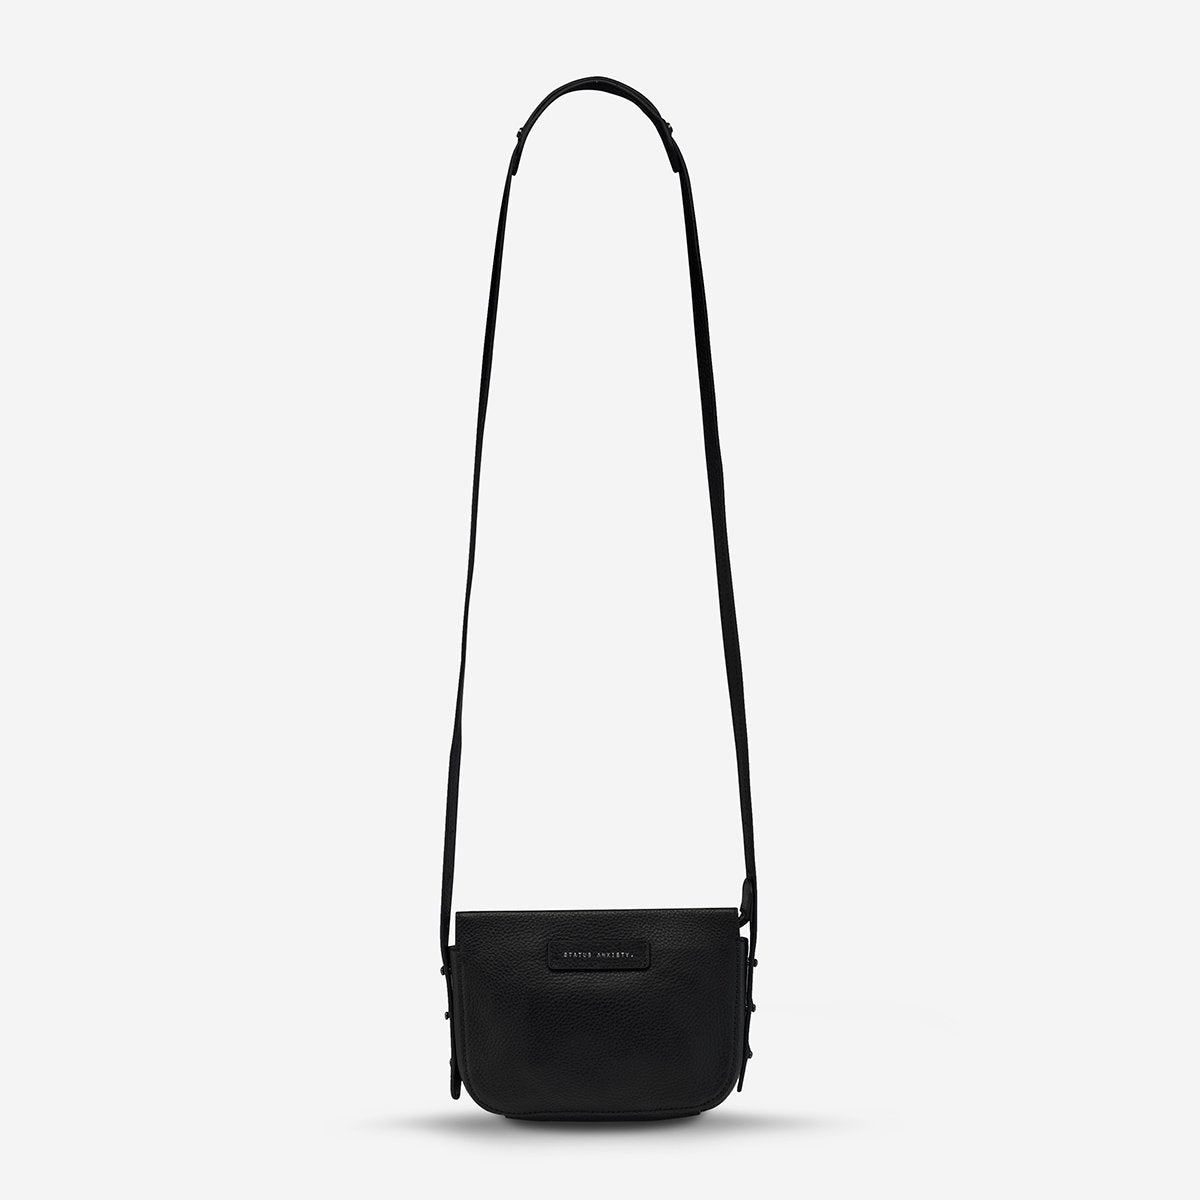 status anxiety black leather crossbody bag in her command front hanging hunterminx